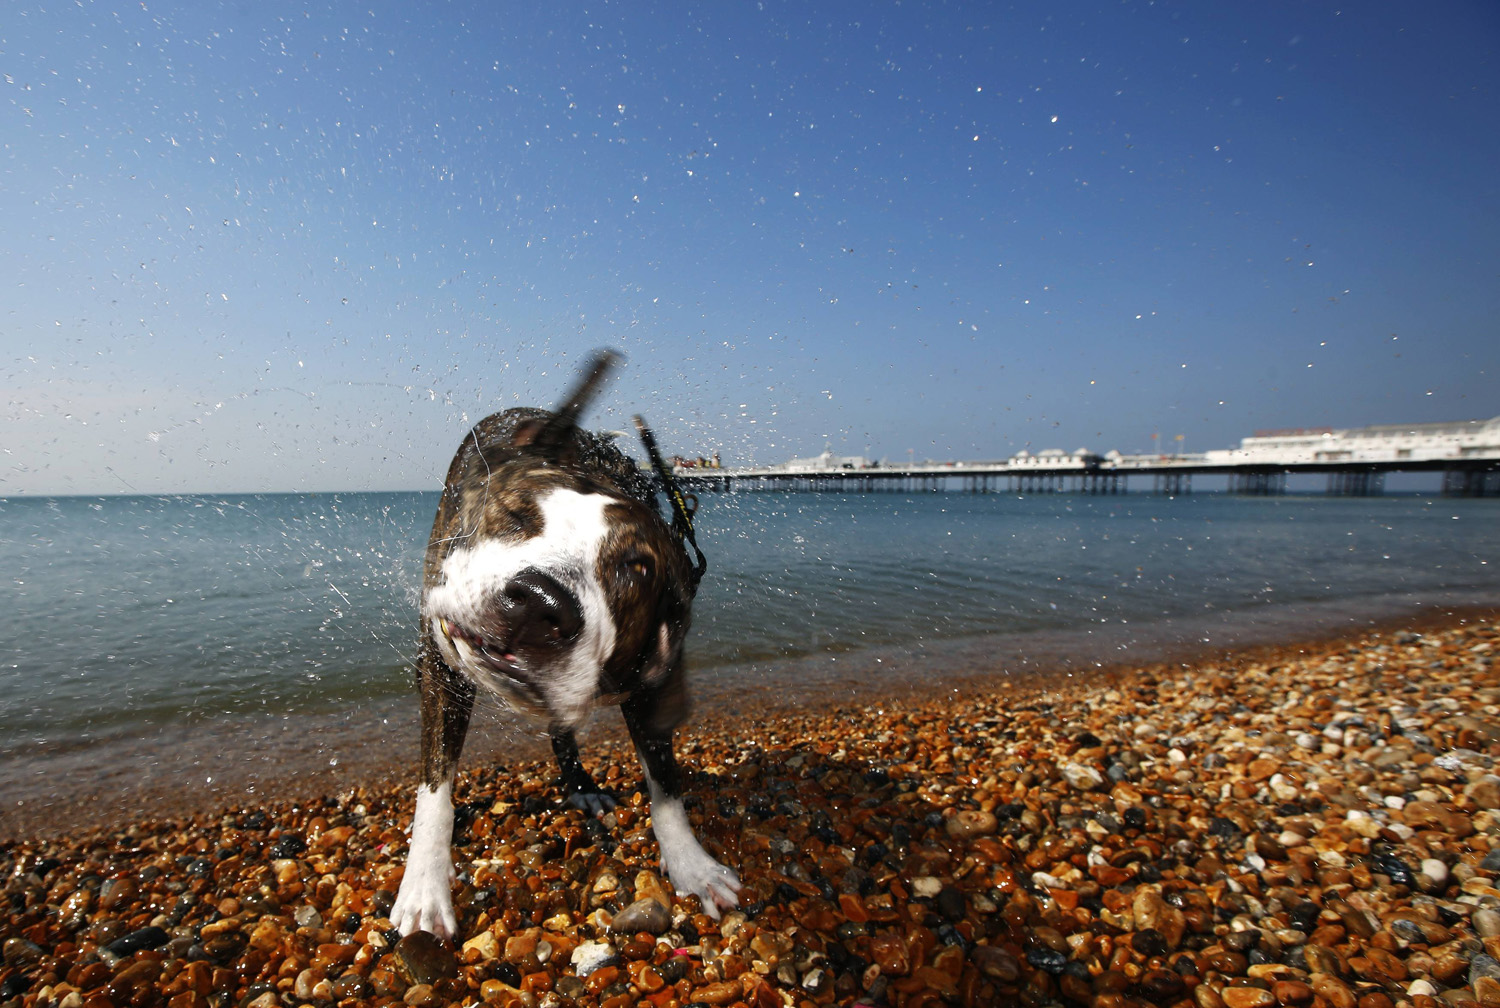 Tosta, a Staffordshire bull terrier cross, shakes off water after a swim in the sea during a hot summer day by Brighton pier in southern England on July 23, 2014.